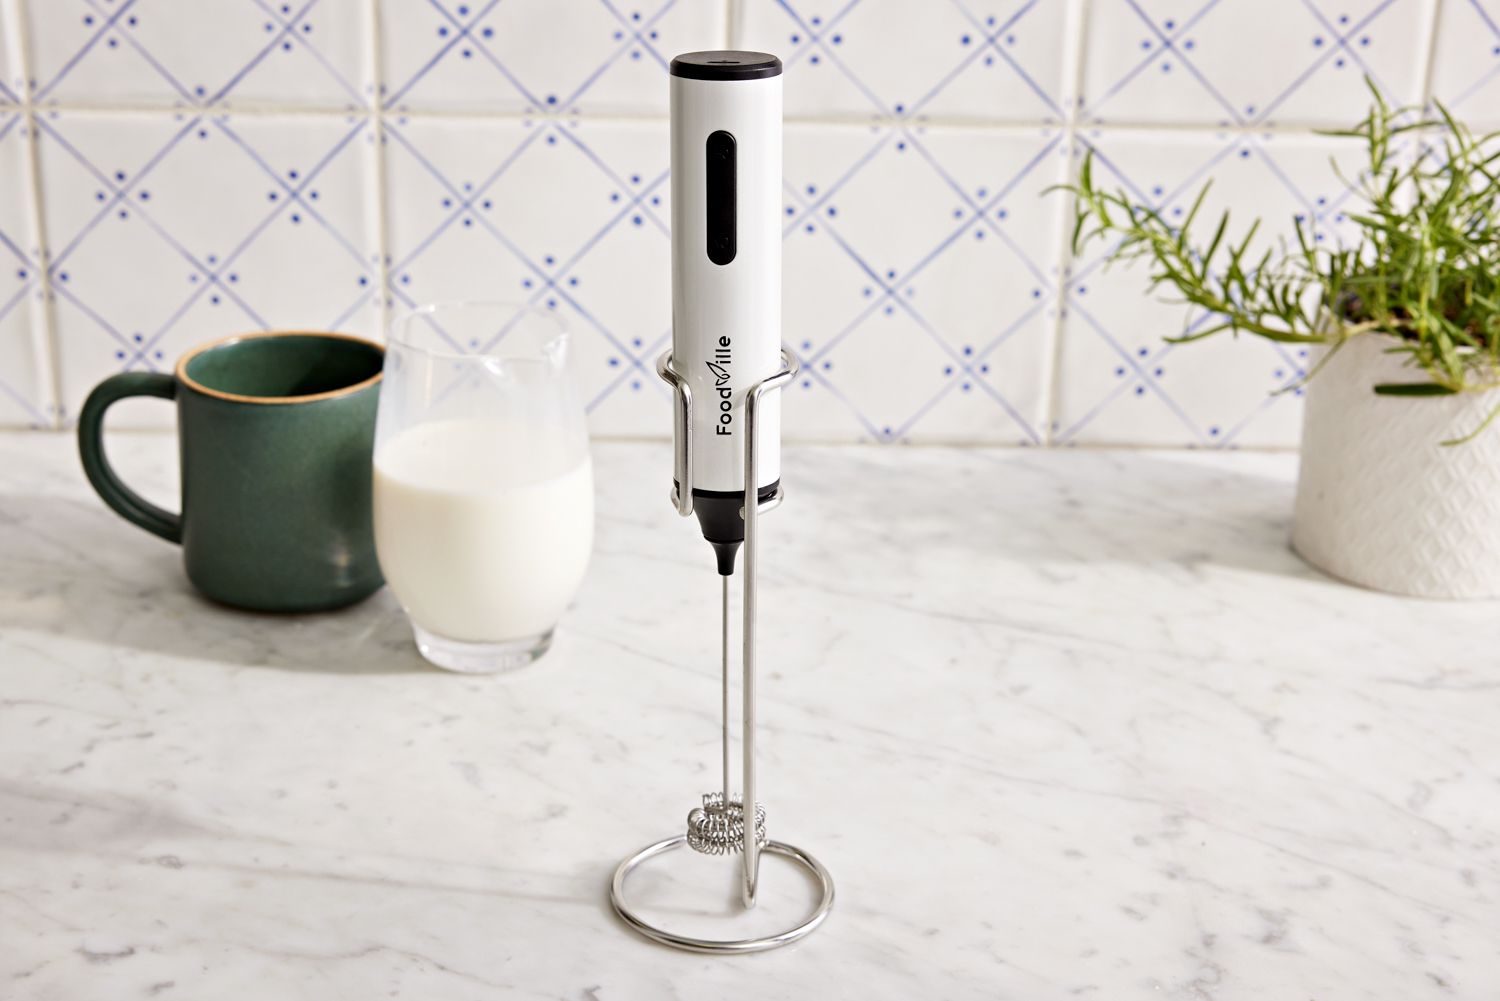 FoodVille MF05 Rechargeable Milk Frother